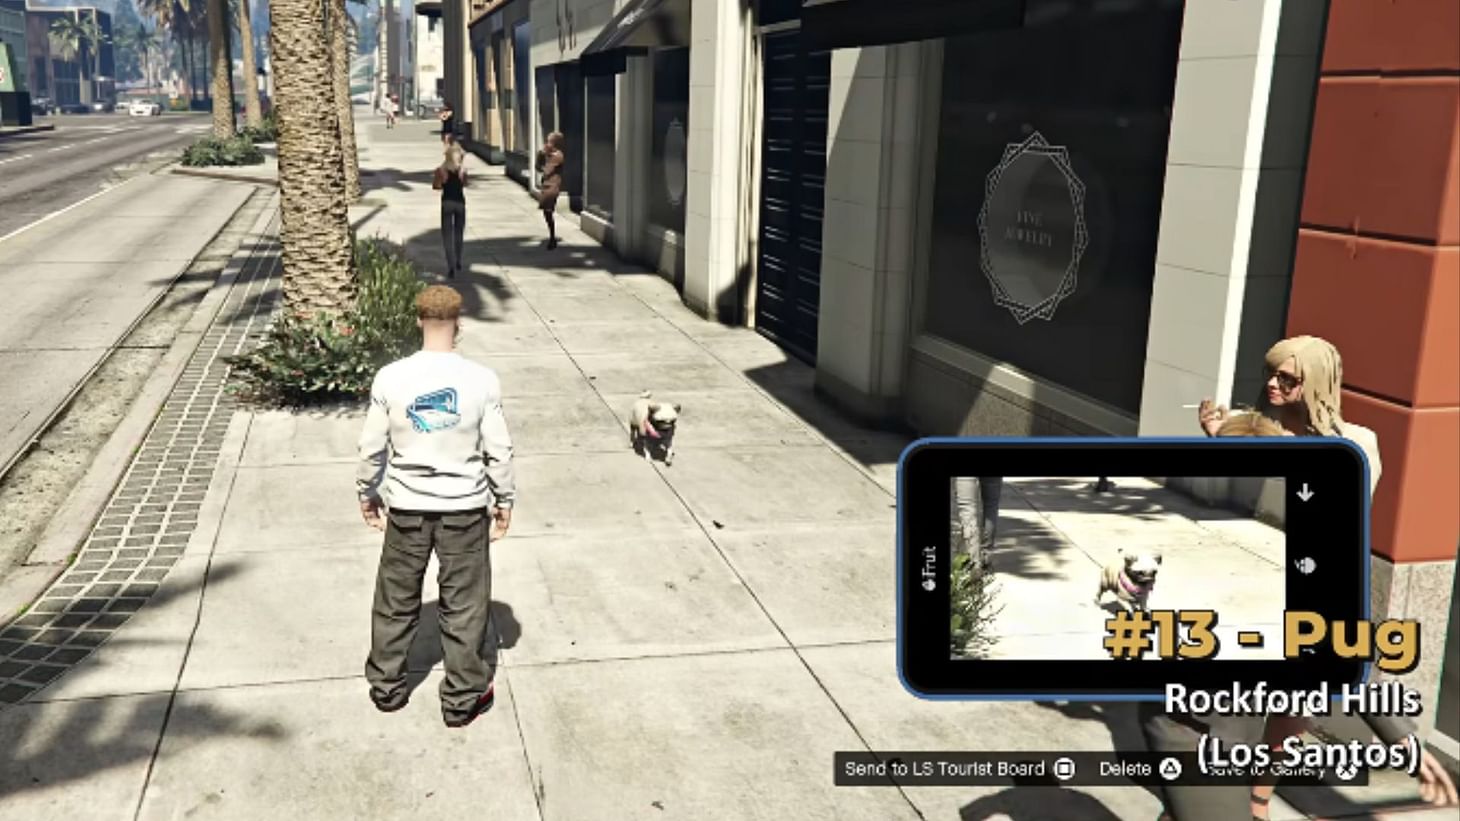 Take an animal/bird&#039;s picture and send it to the LS Tourist Board to earn rewards (Image via YouTube/GTA Series Videos)